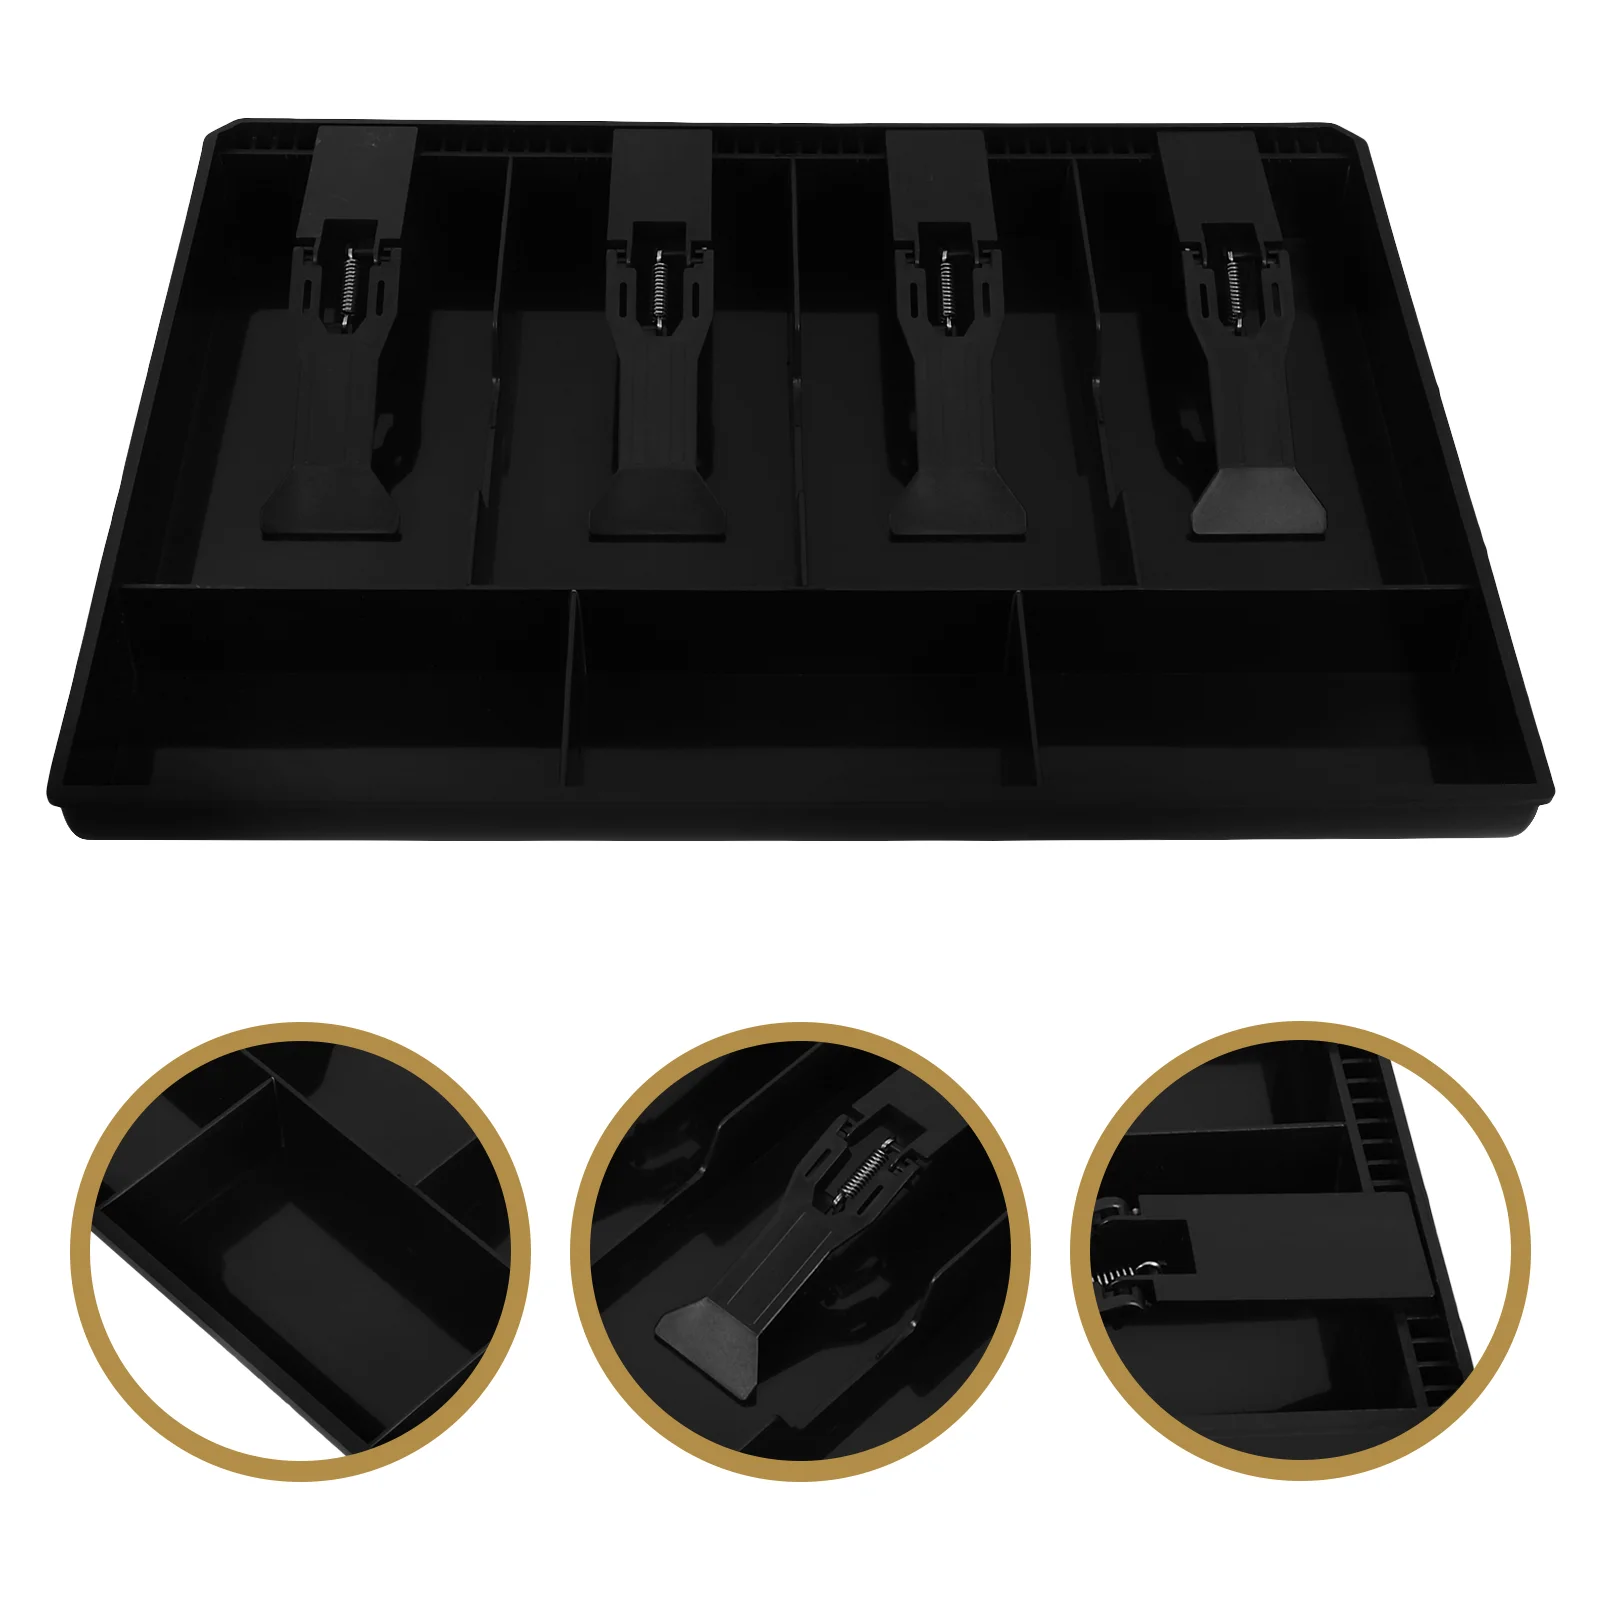 

4 Bills and 3 Cash Drawer Insert Trays Cashier Drawer Cash Collection Box Insert Tray for Market Bank Home (Black)